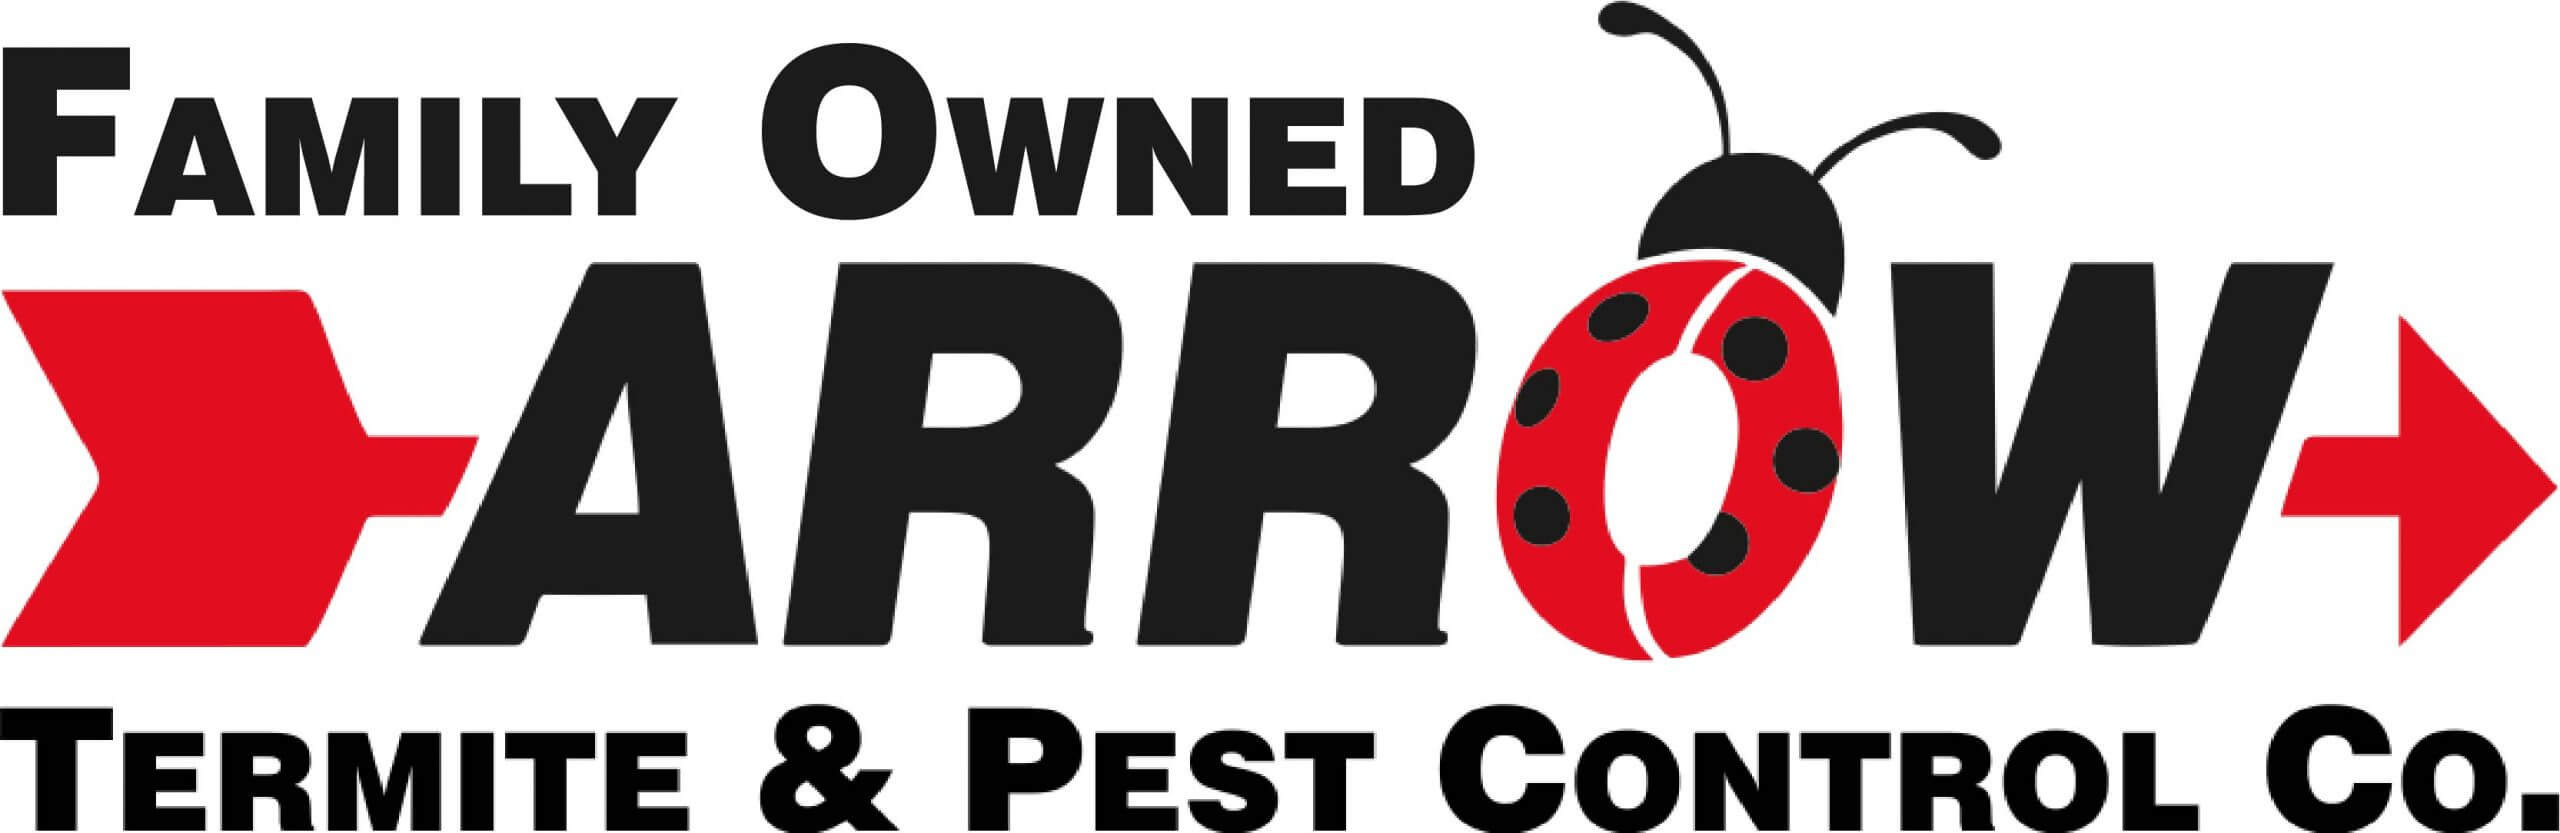 https://growthzonecmsprodeastus.azureedge.net/sites/97/2024/04/Arrow-Termite-and-Pest-Control-Family-Owned-Logo-scaled-1.jpg